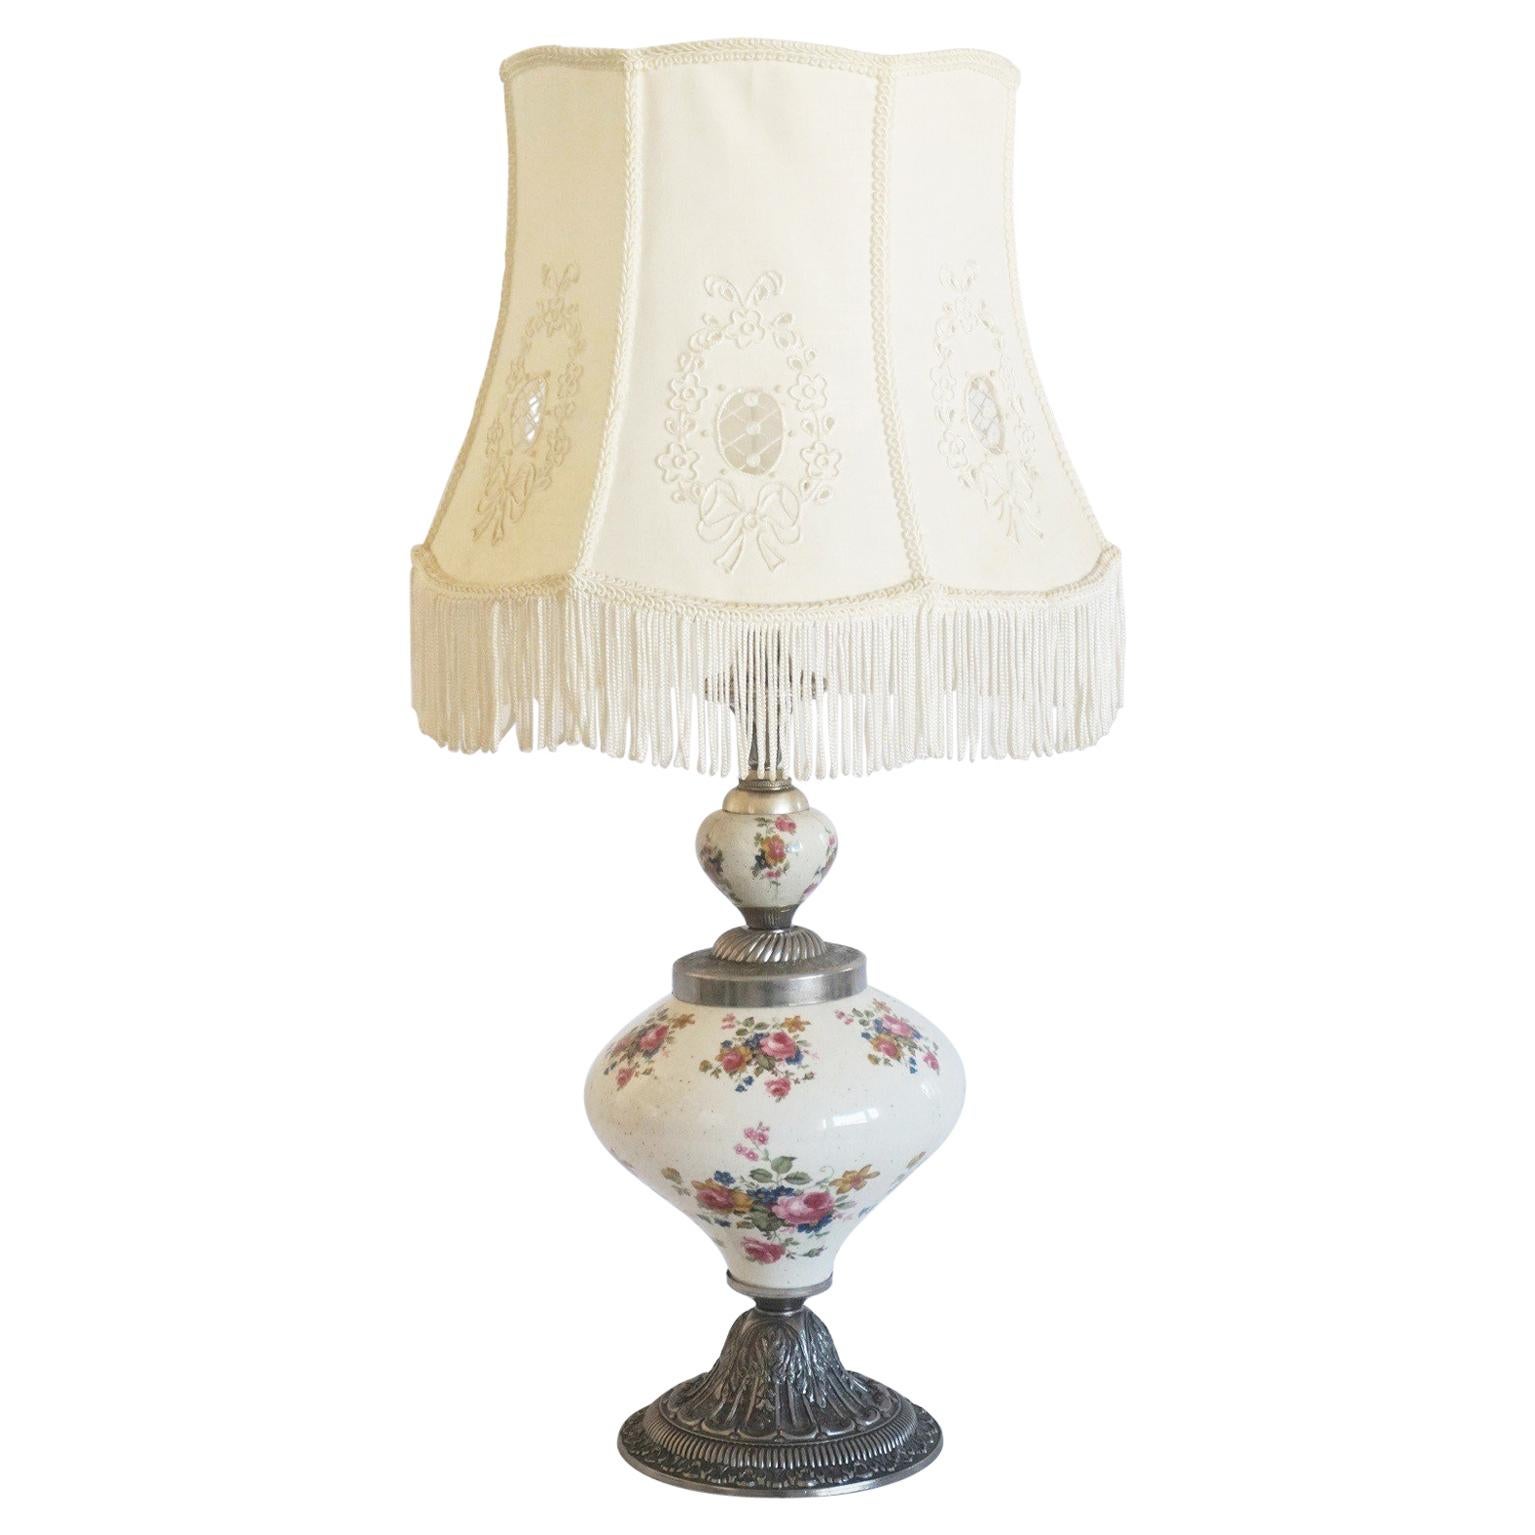 Midcentury Hand Painted Porcelain Table Lamp with Hand Embroidered Linen Shade